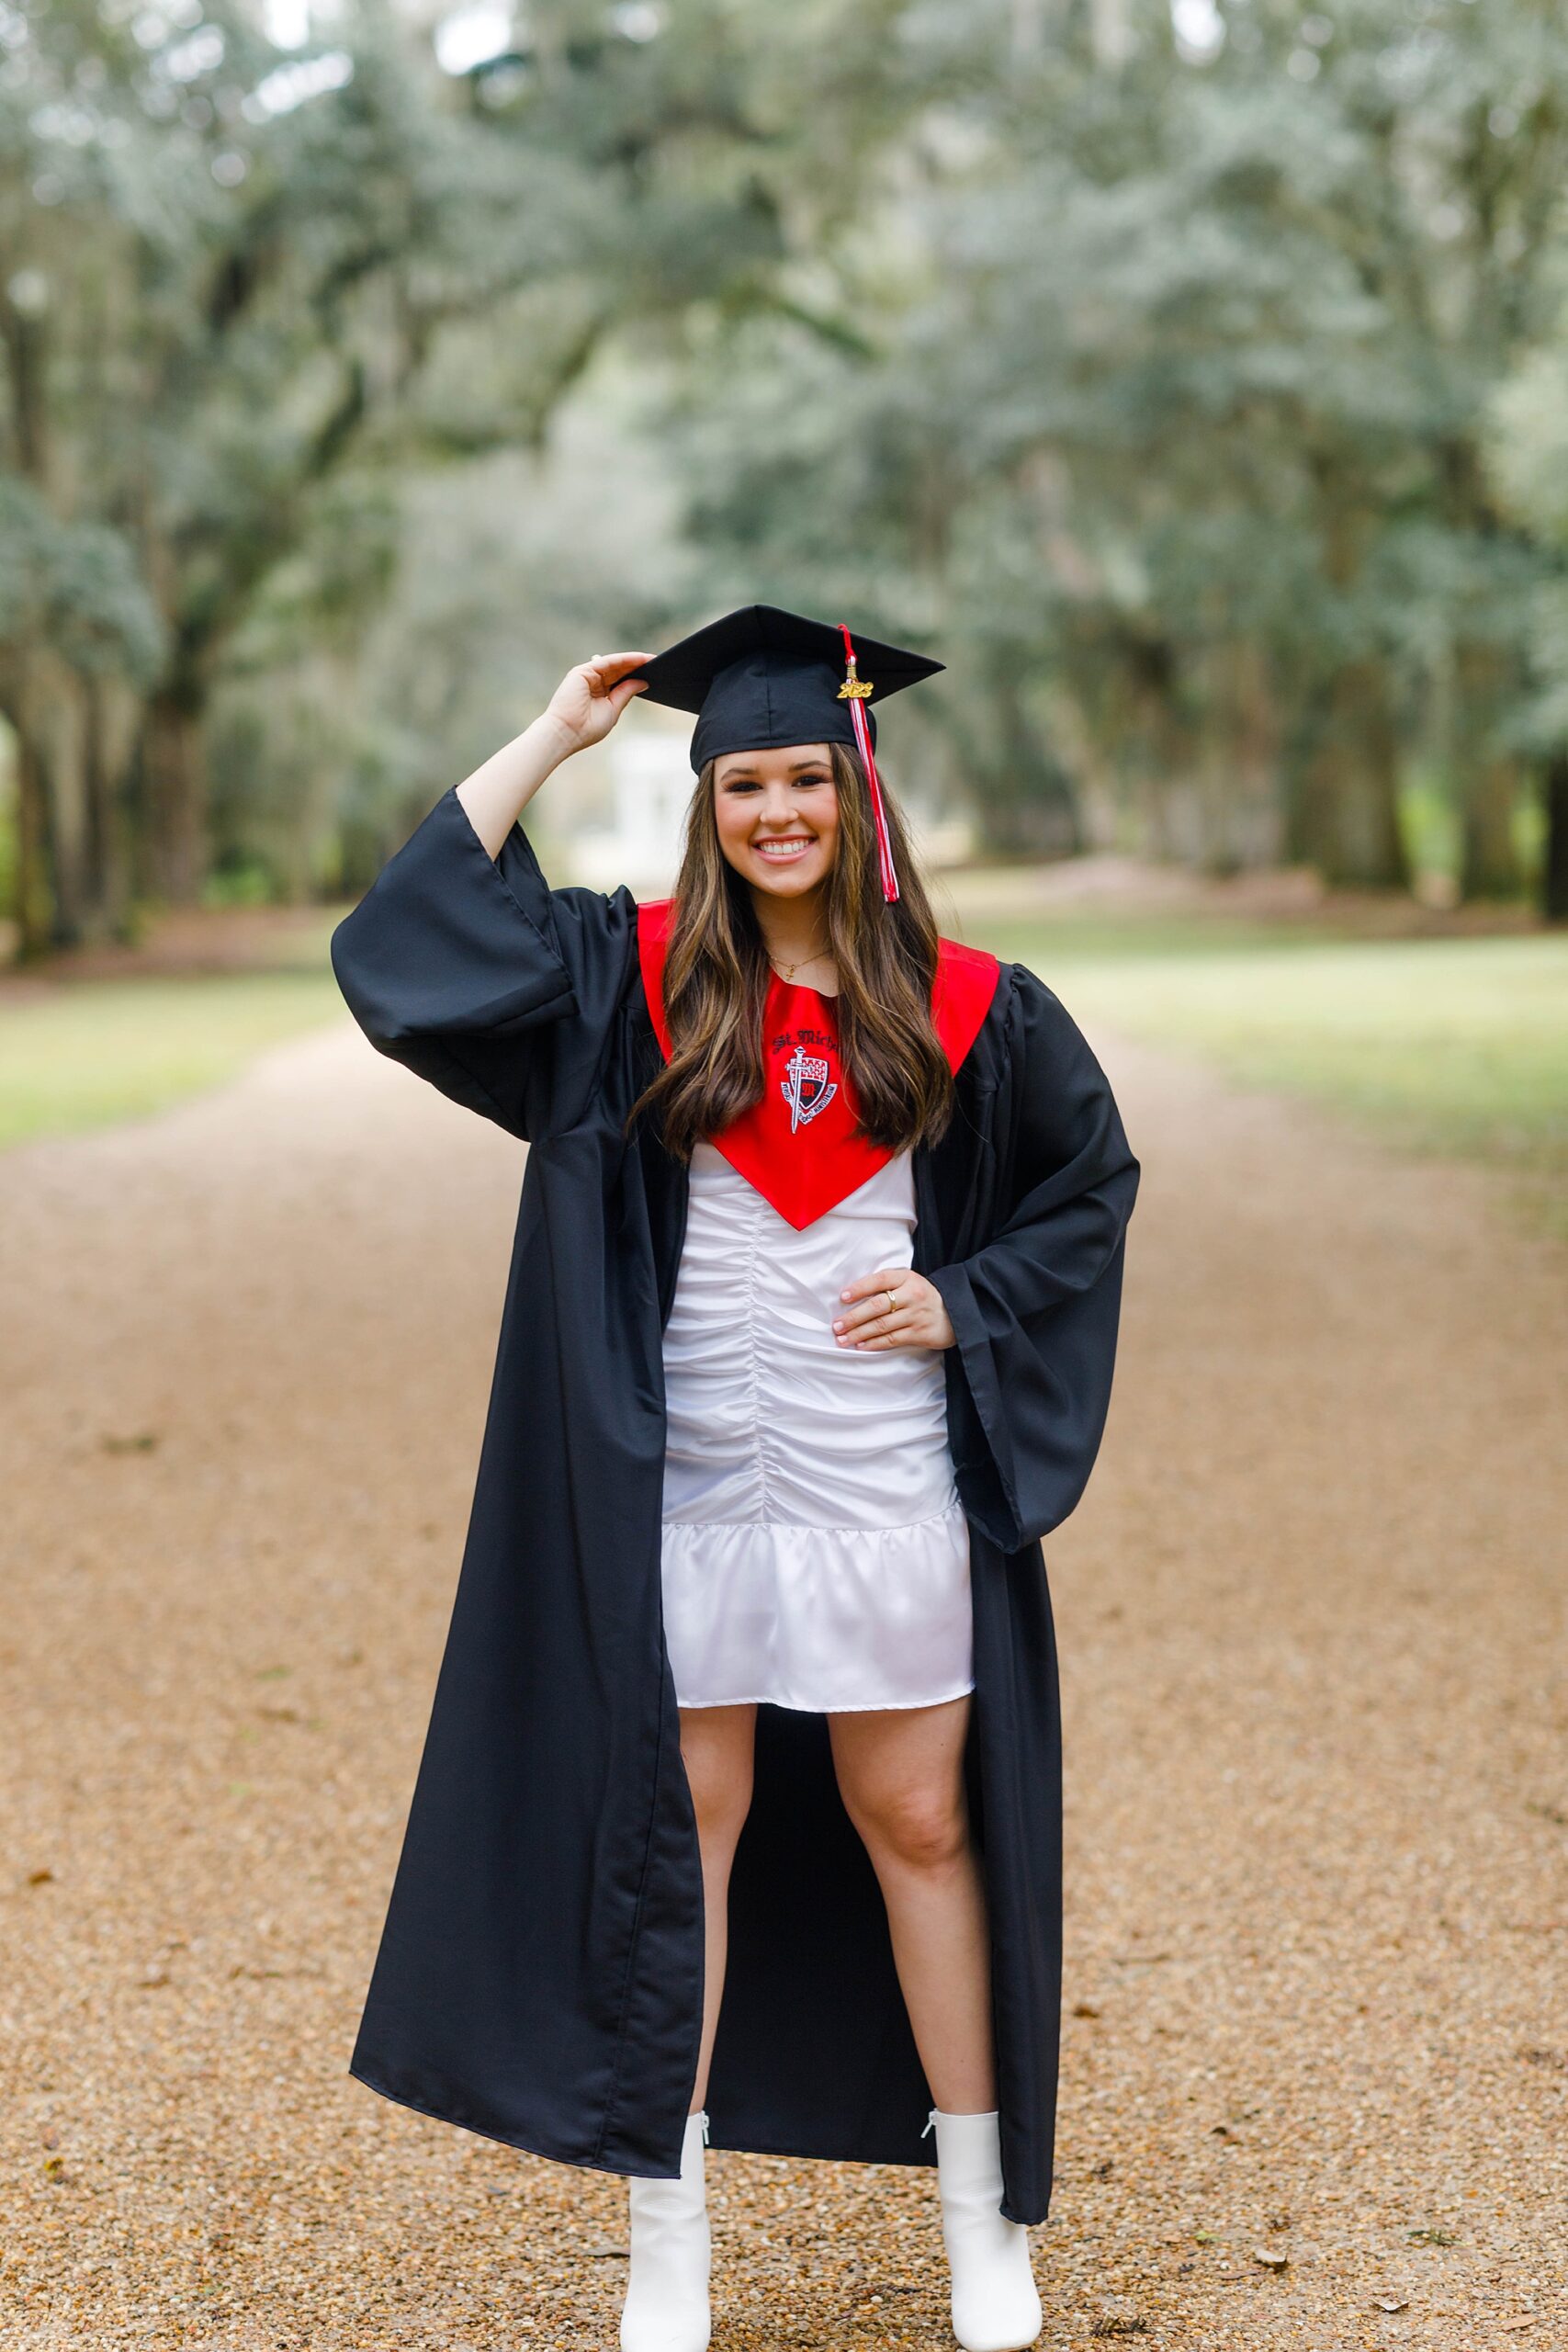 3 reasons to Book Your Senior Session Early